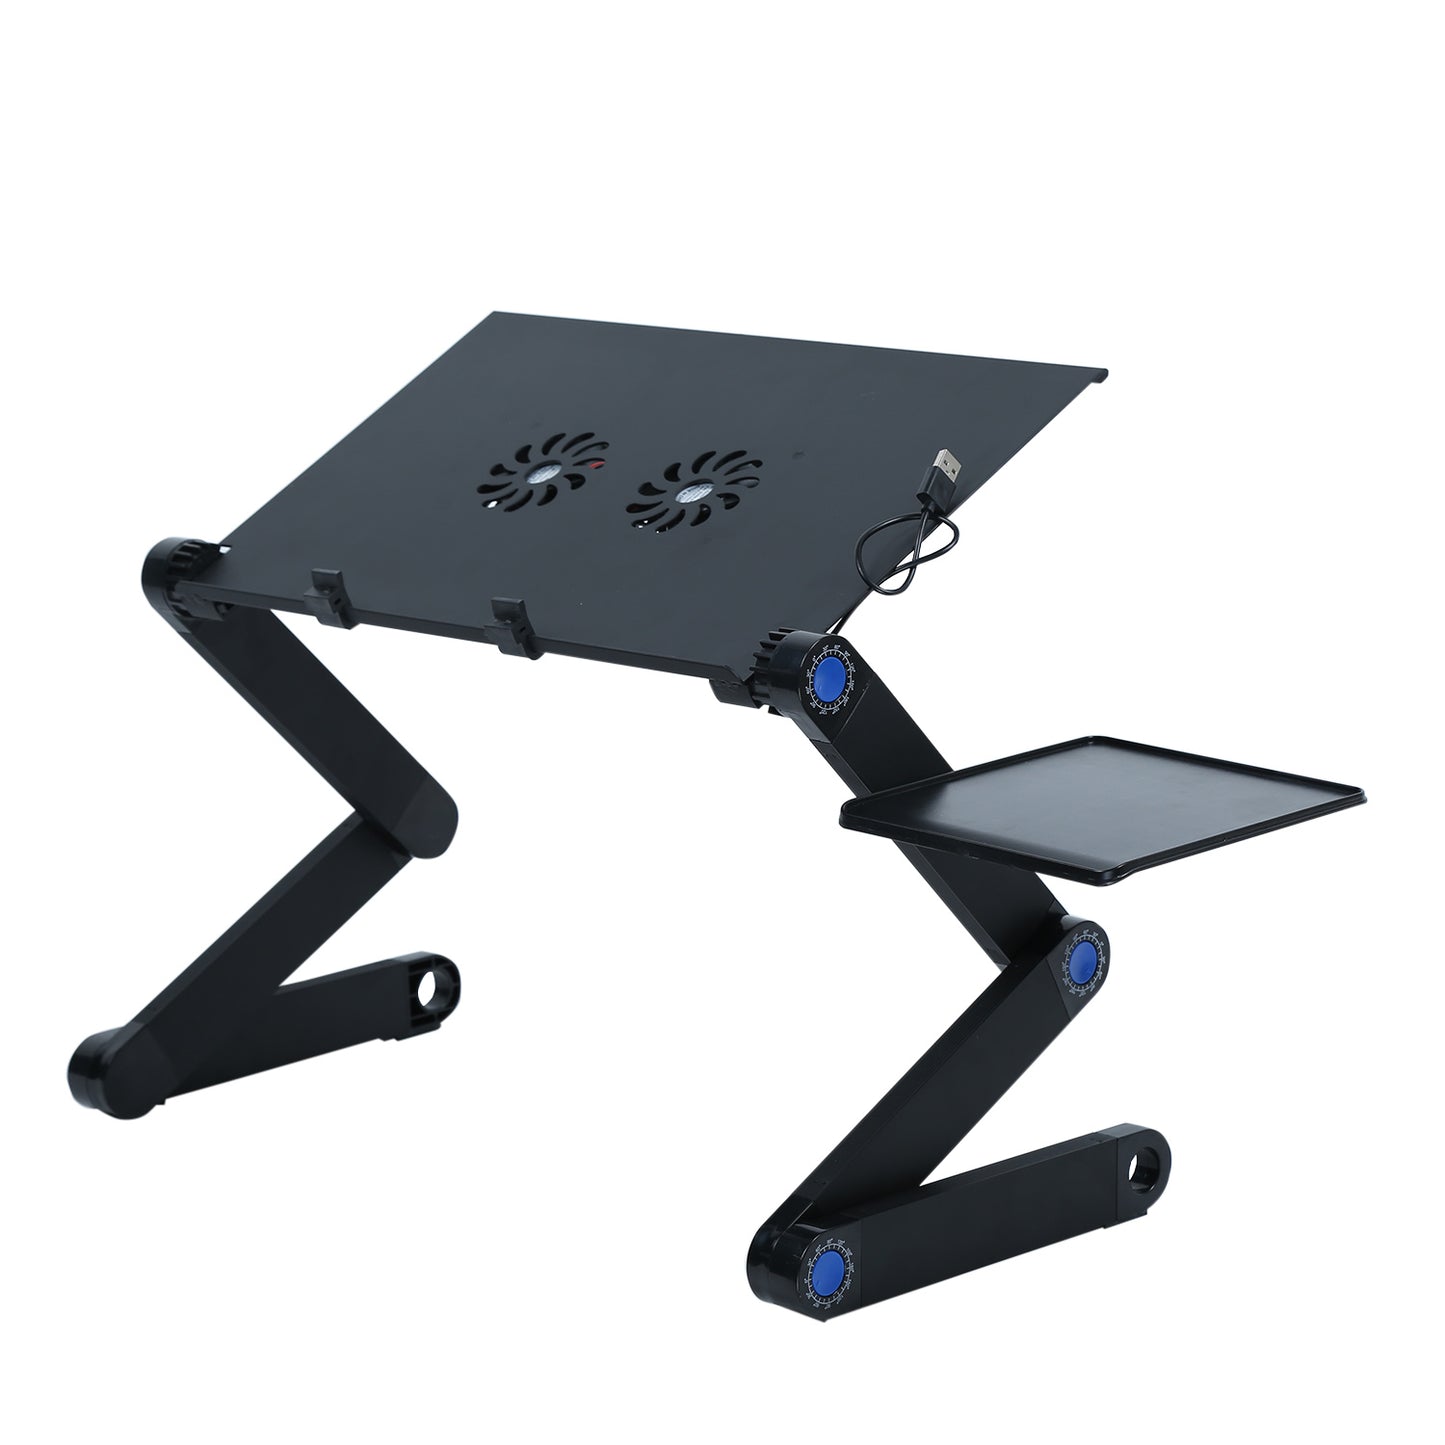 Bed Desk Lazy Aluminum Folding Small Table Cooling Laptop Desk Stand